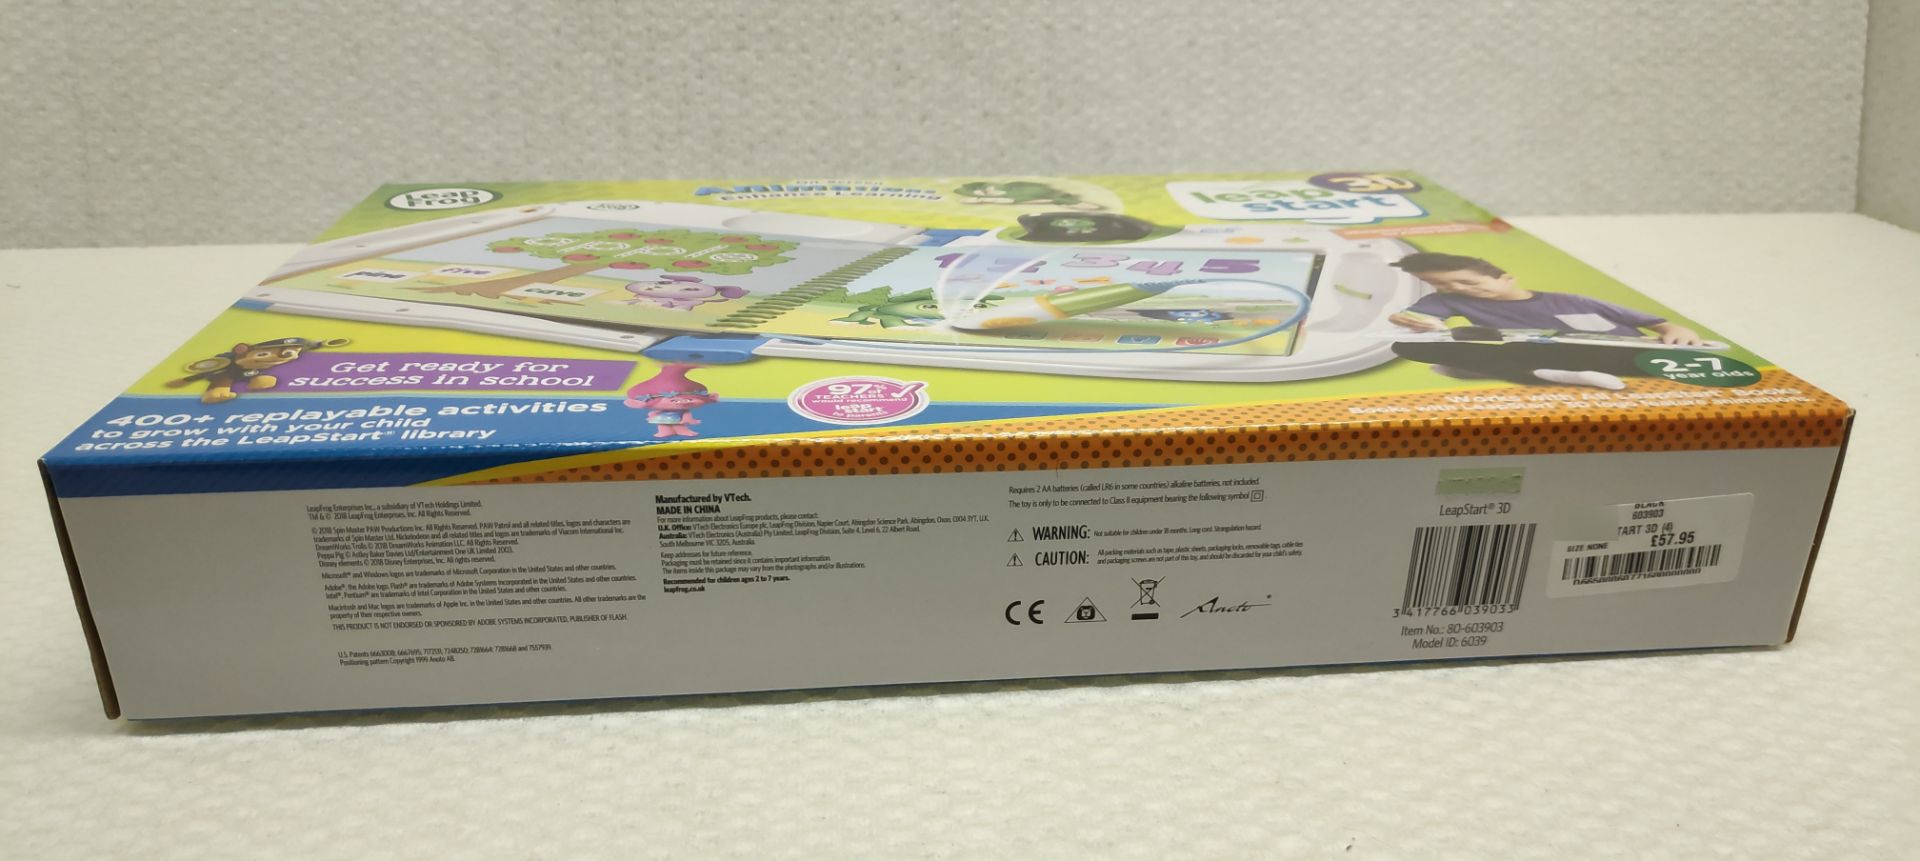 1 x LeapFrog LeapStart 3D Interactive Learing System - New/Boxed - Image 3 of 6